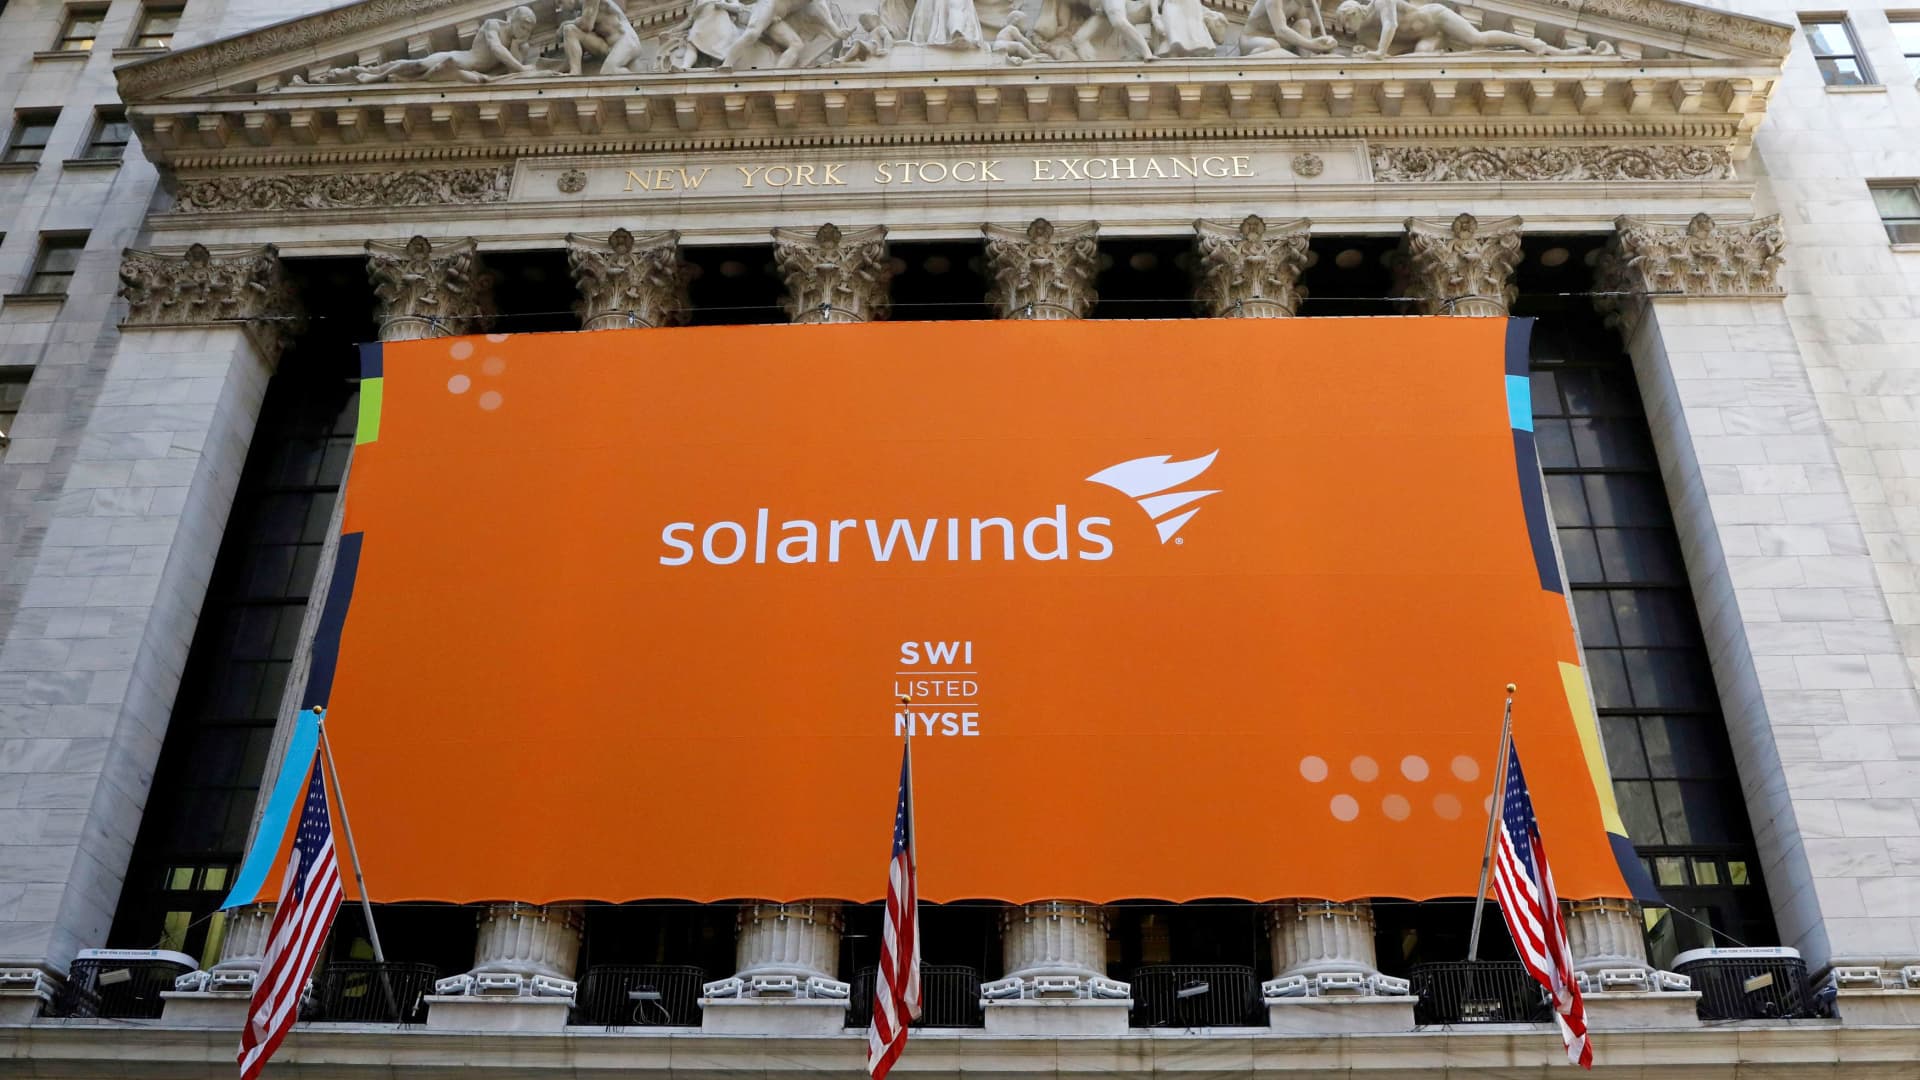 SEC alleges SolarWinds and key executive misled investors about cybersecurity prior to 'massive' cyberattack